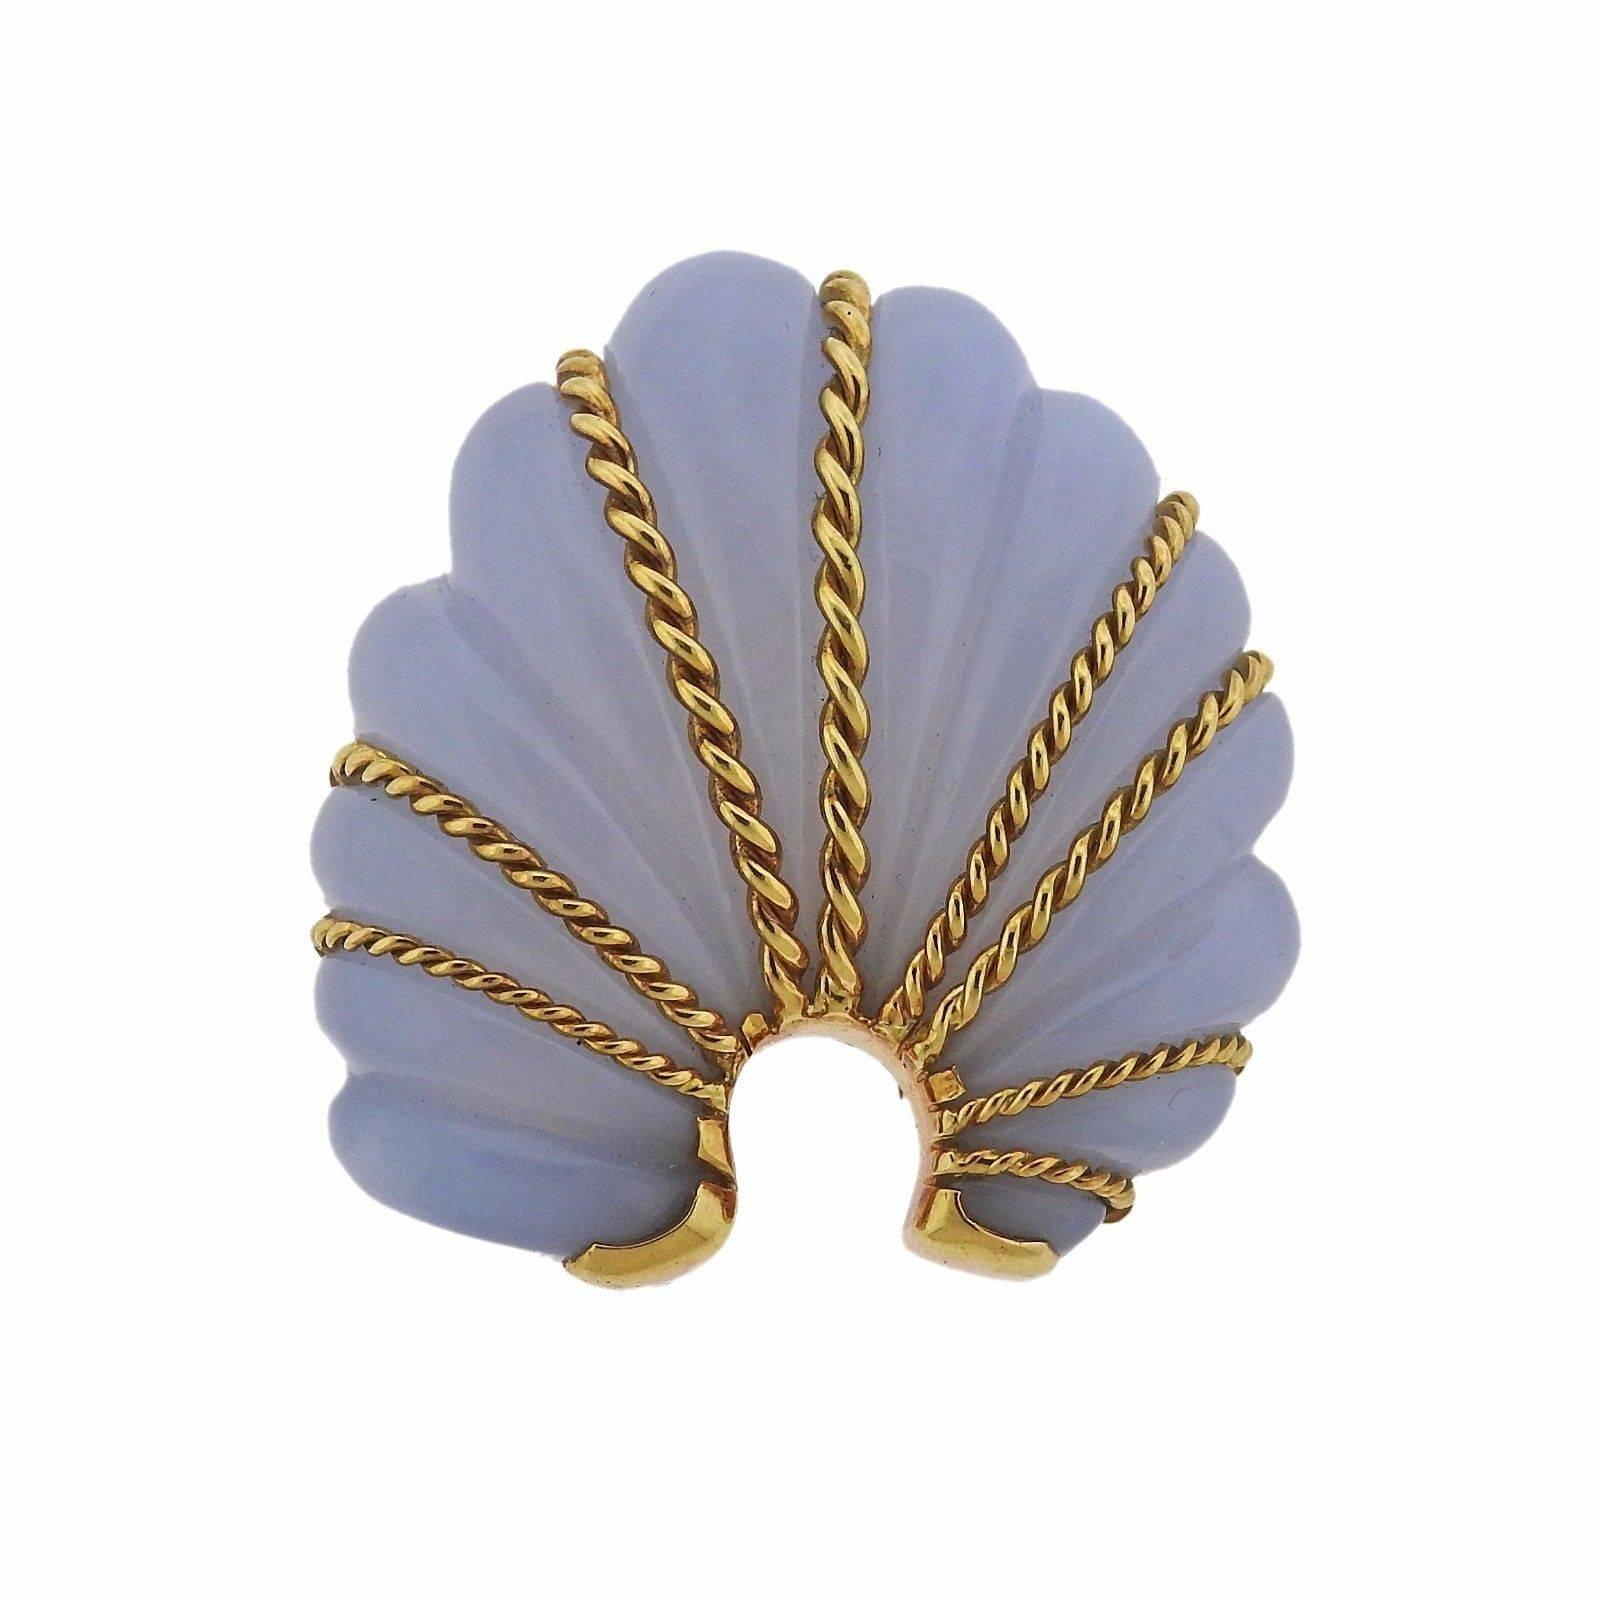 An 18k yellow gold brooch set with chalcedony.  The brooch is 53mm x 50mm and weighs 55.3 grams.  Marked: Shell signature mark, 11348, 750, Seaman Schepps.